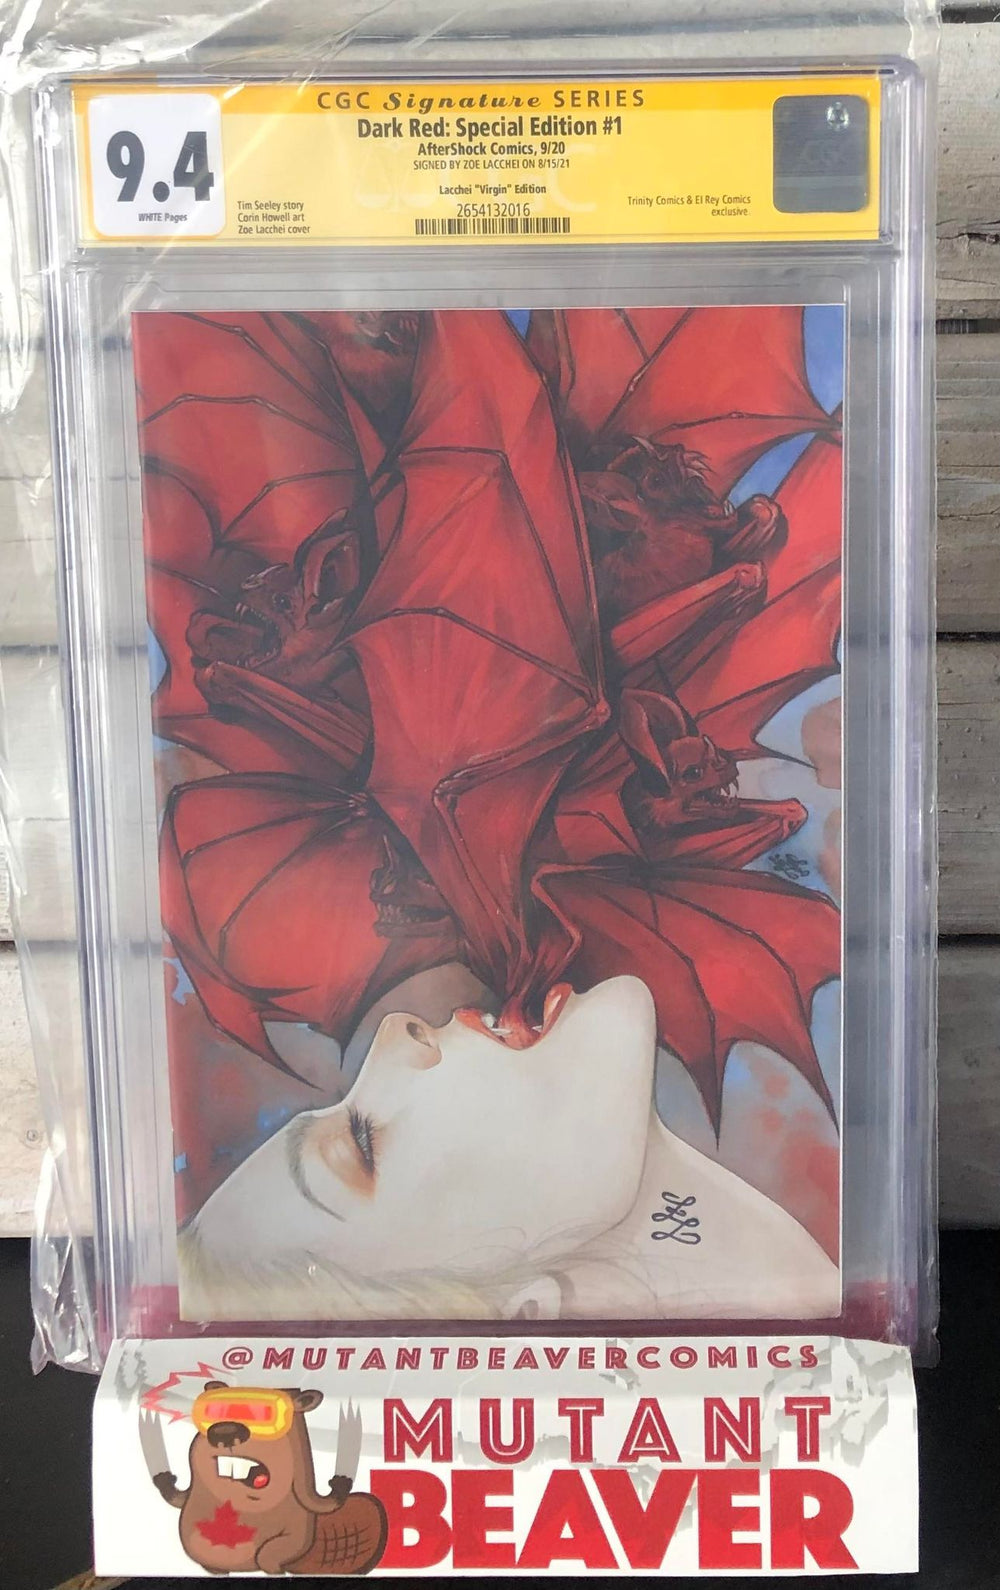 CGC YELLOW LABEL DARK RED: SPECIAL EDITION #1 Zoe Lacchei VIRGIN EXCLUSIVE (MULTIPLE GRADES AVAILABLE)